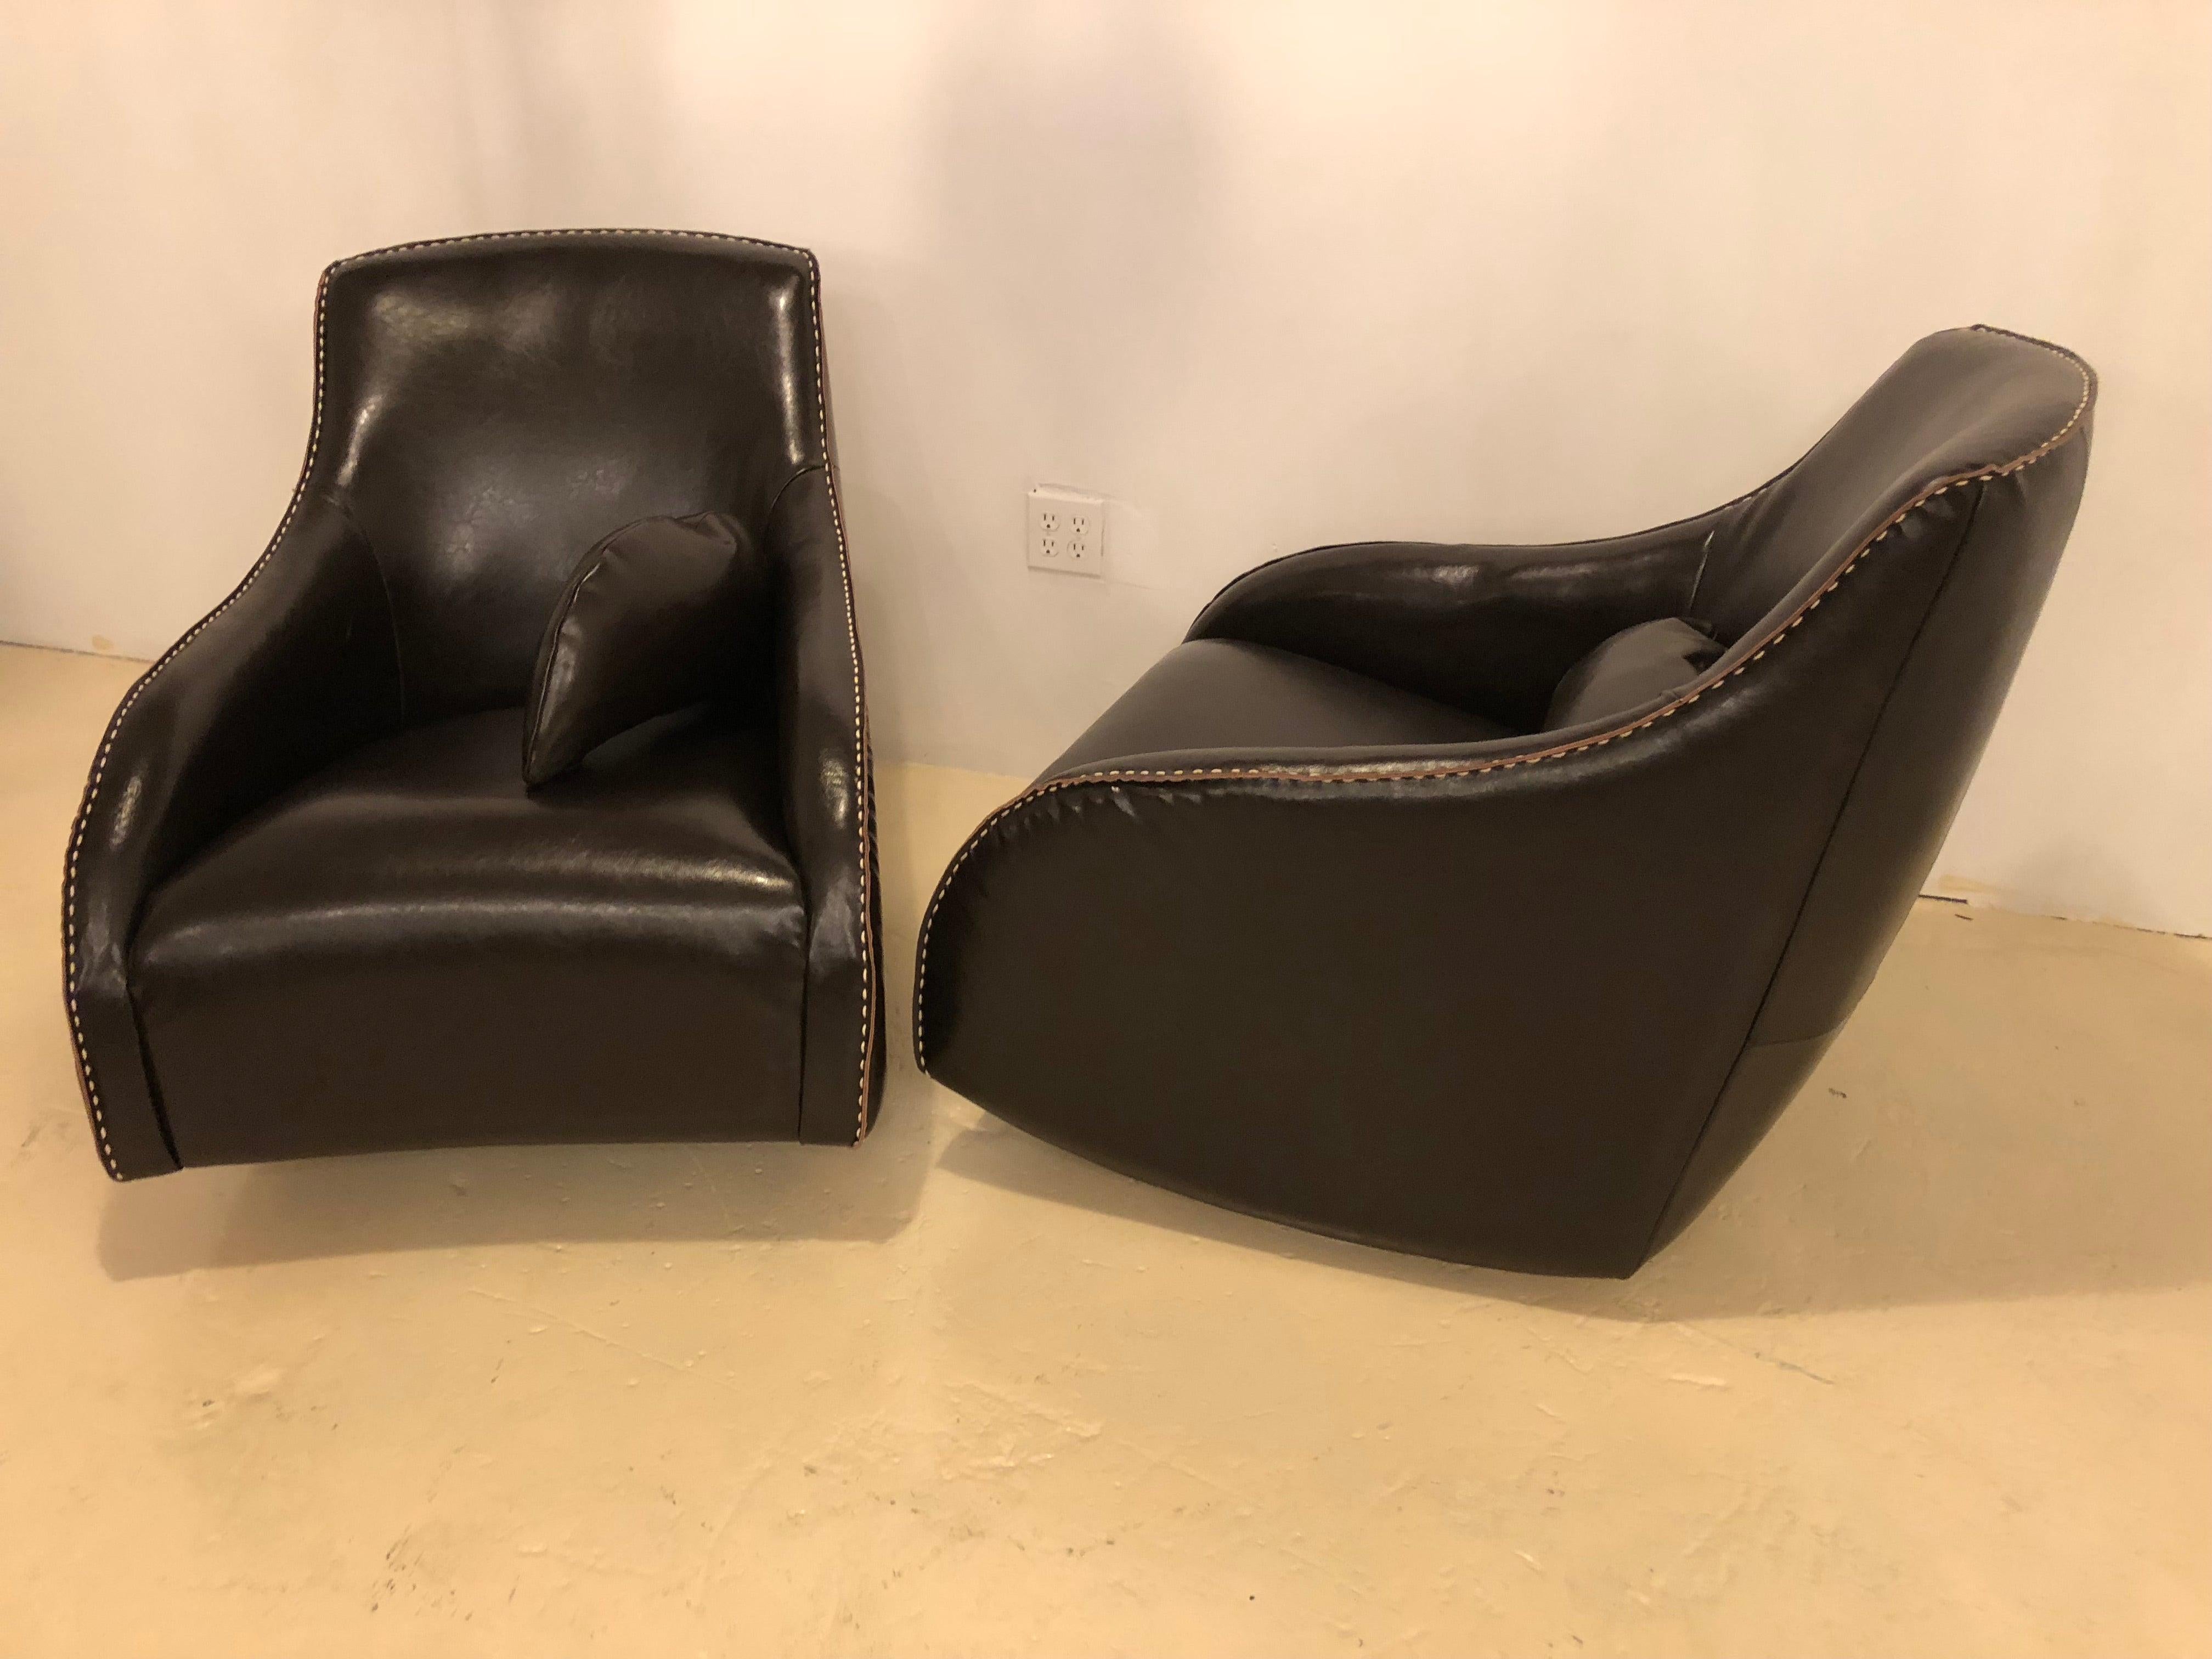 Late 20th Century Pair of Fine Dark Brown Leather Rocking Club Chairs, Mid-Century Modern Style